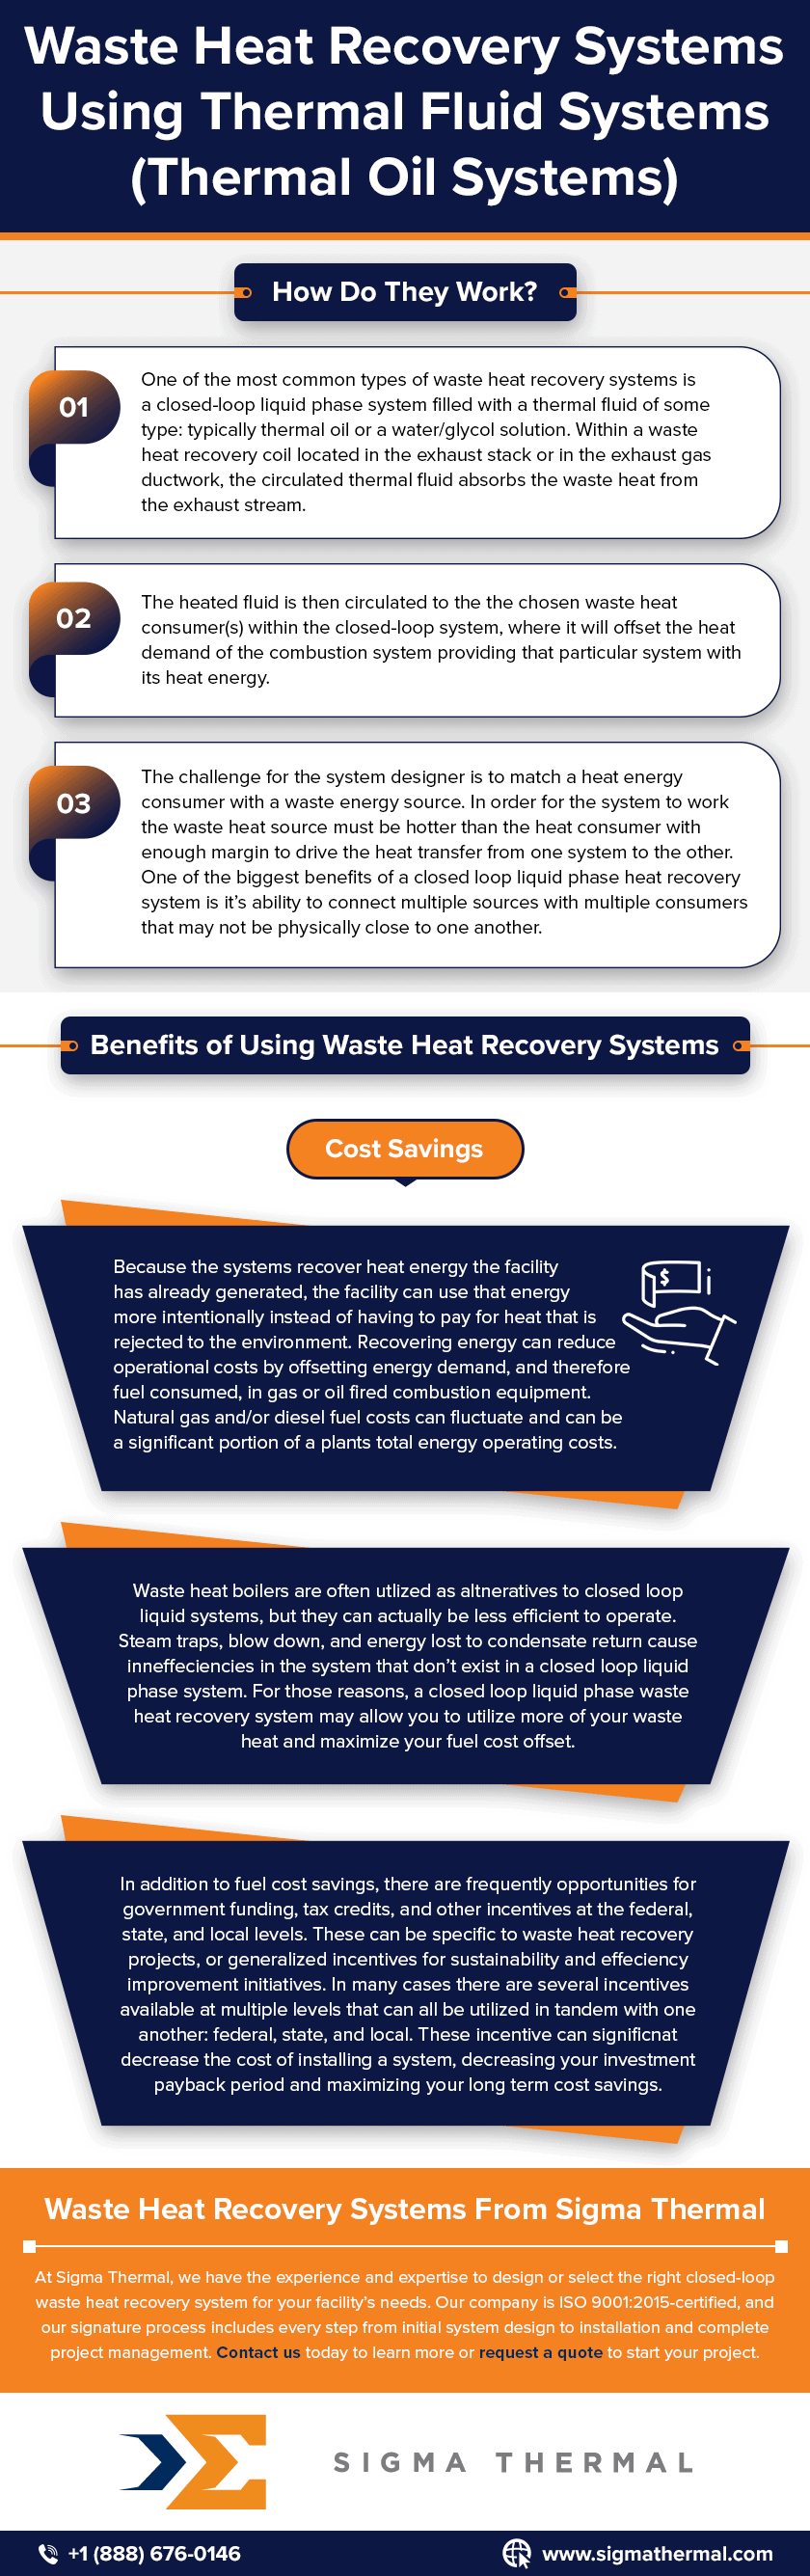 Waste Heat Recovery Systems Using Thermal Fluid Systems (Thermal Oil Systems)